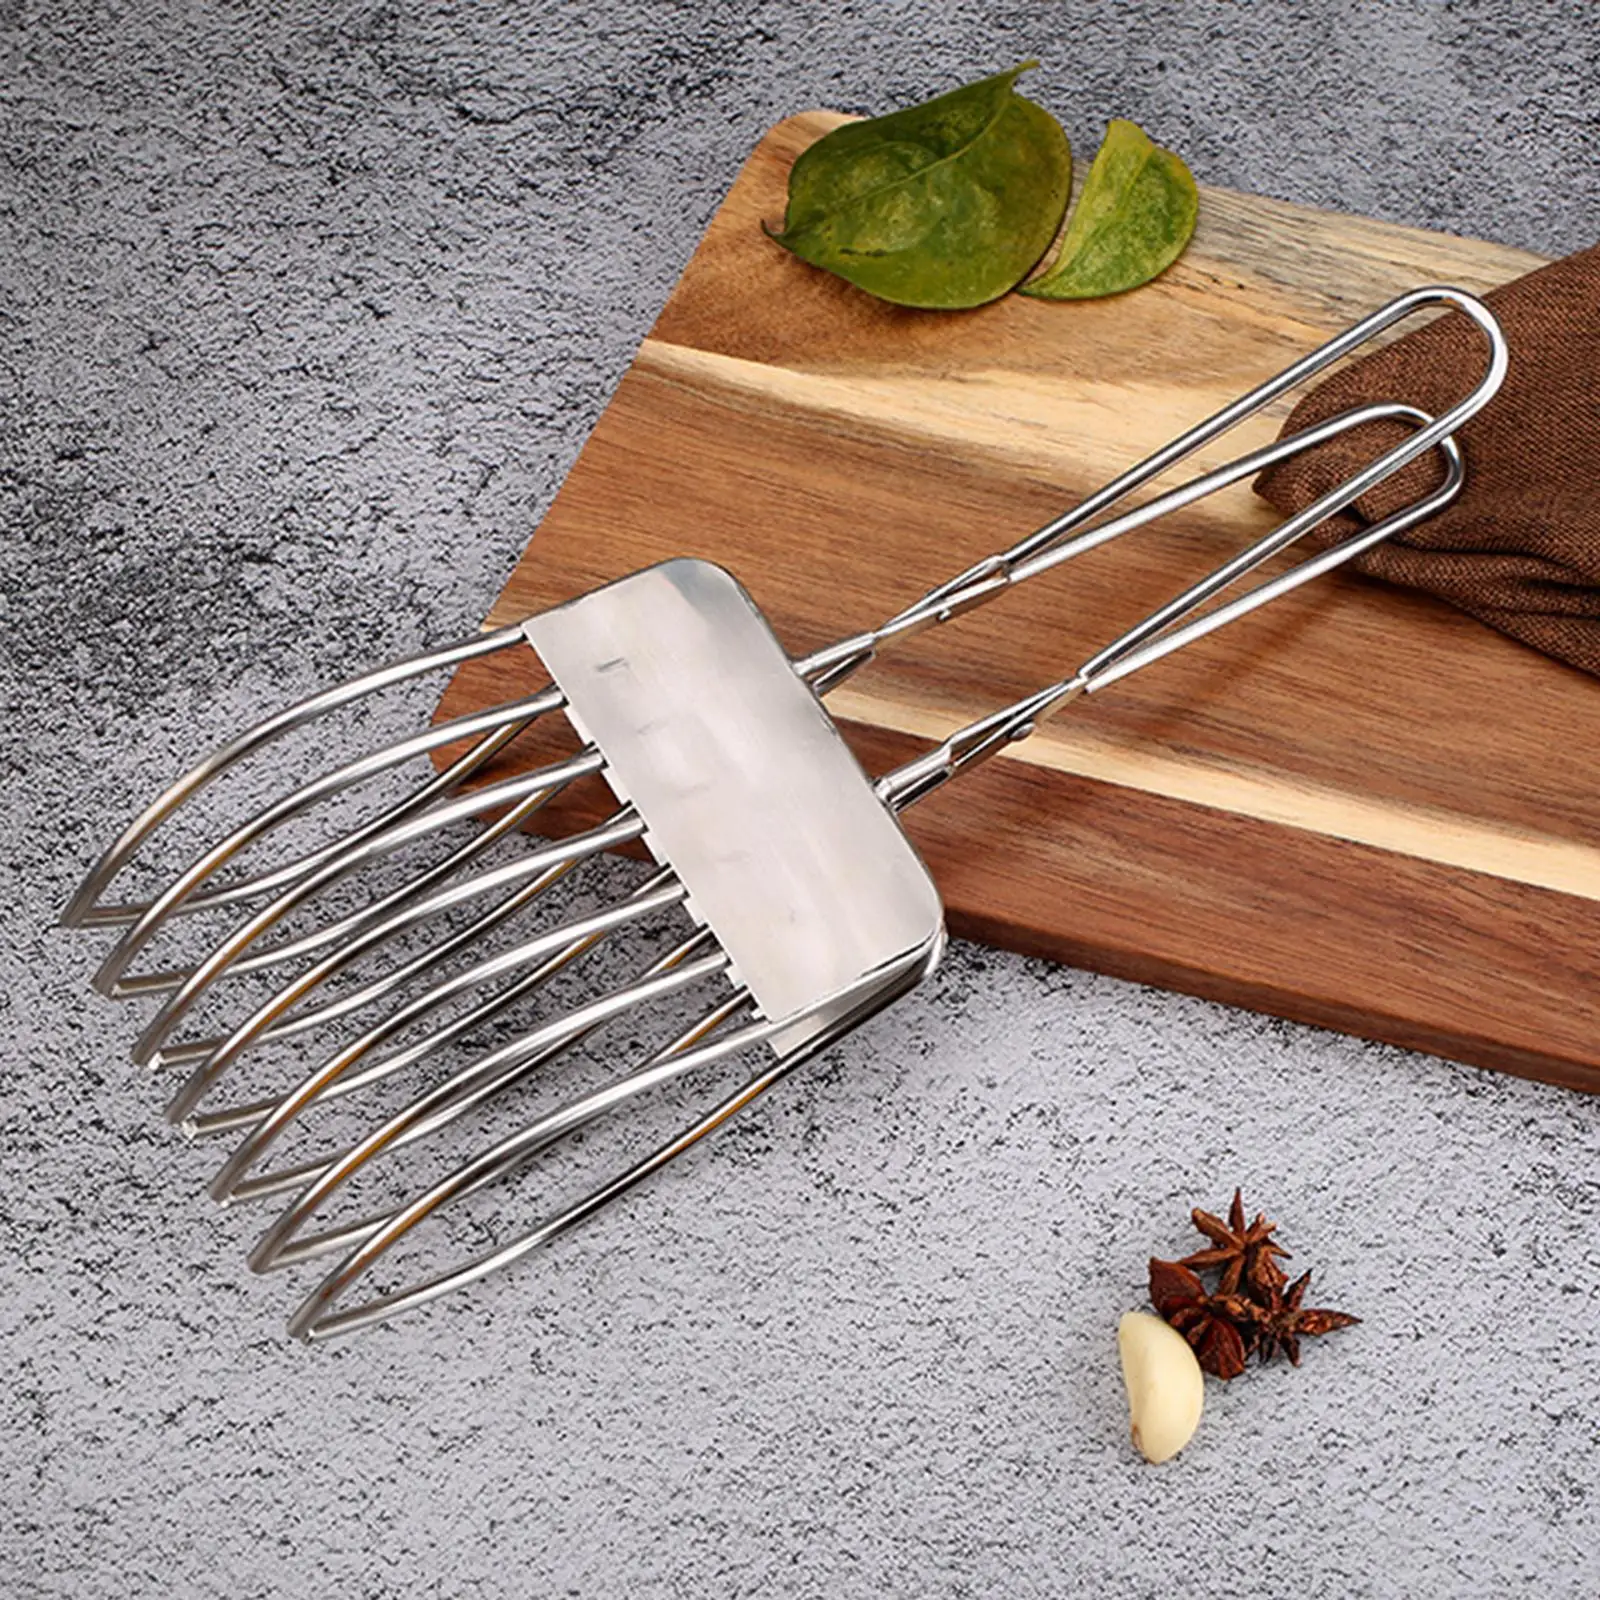 Stainless Steel Roast Beef Tongs Kitchen Tongs Cooking Tools Accessories for Slicing Vegetable